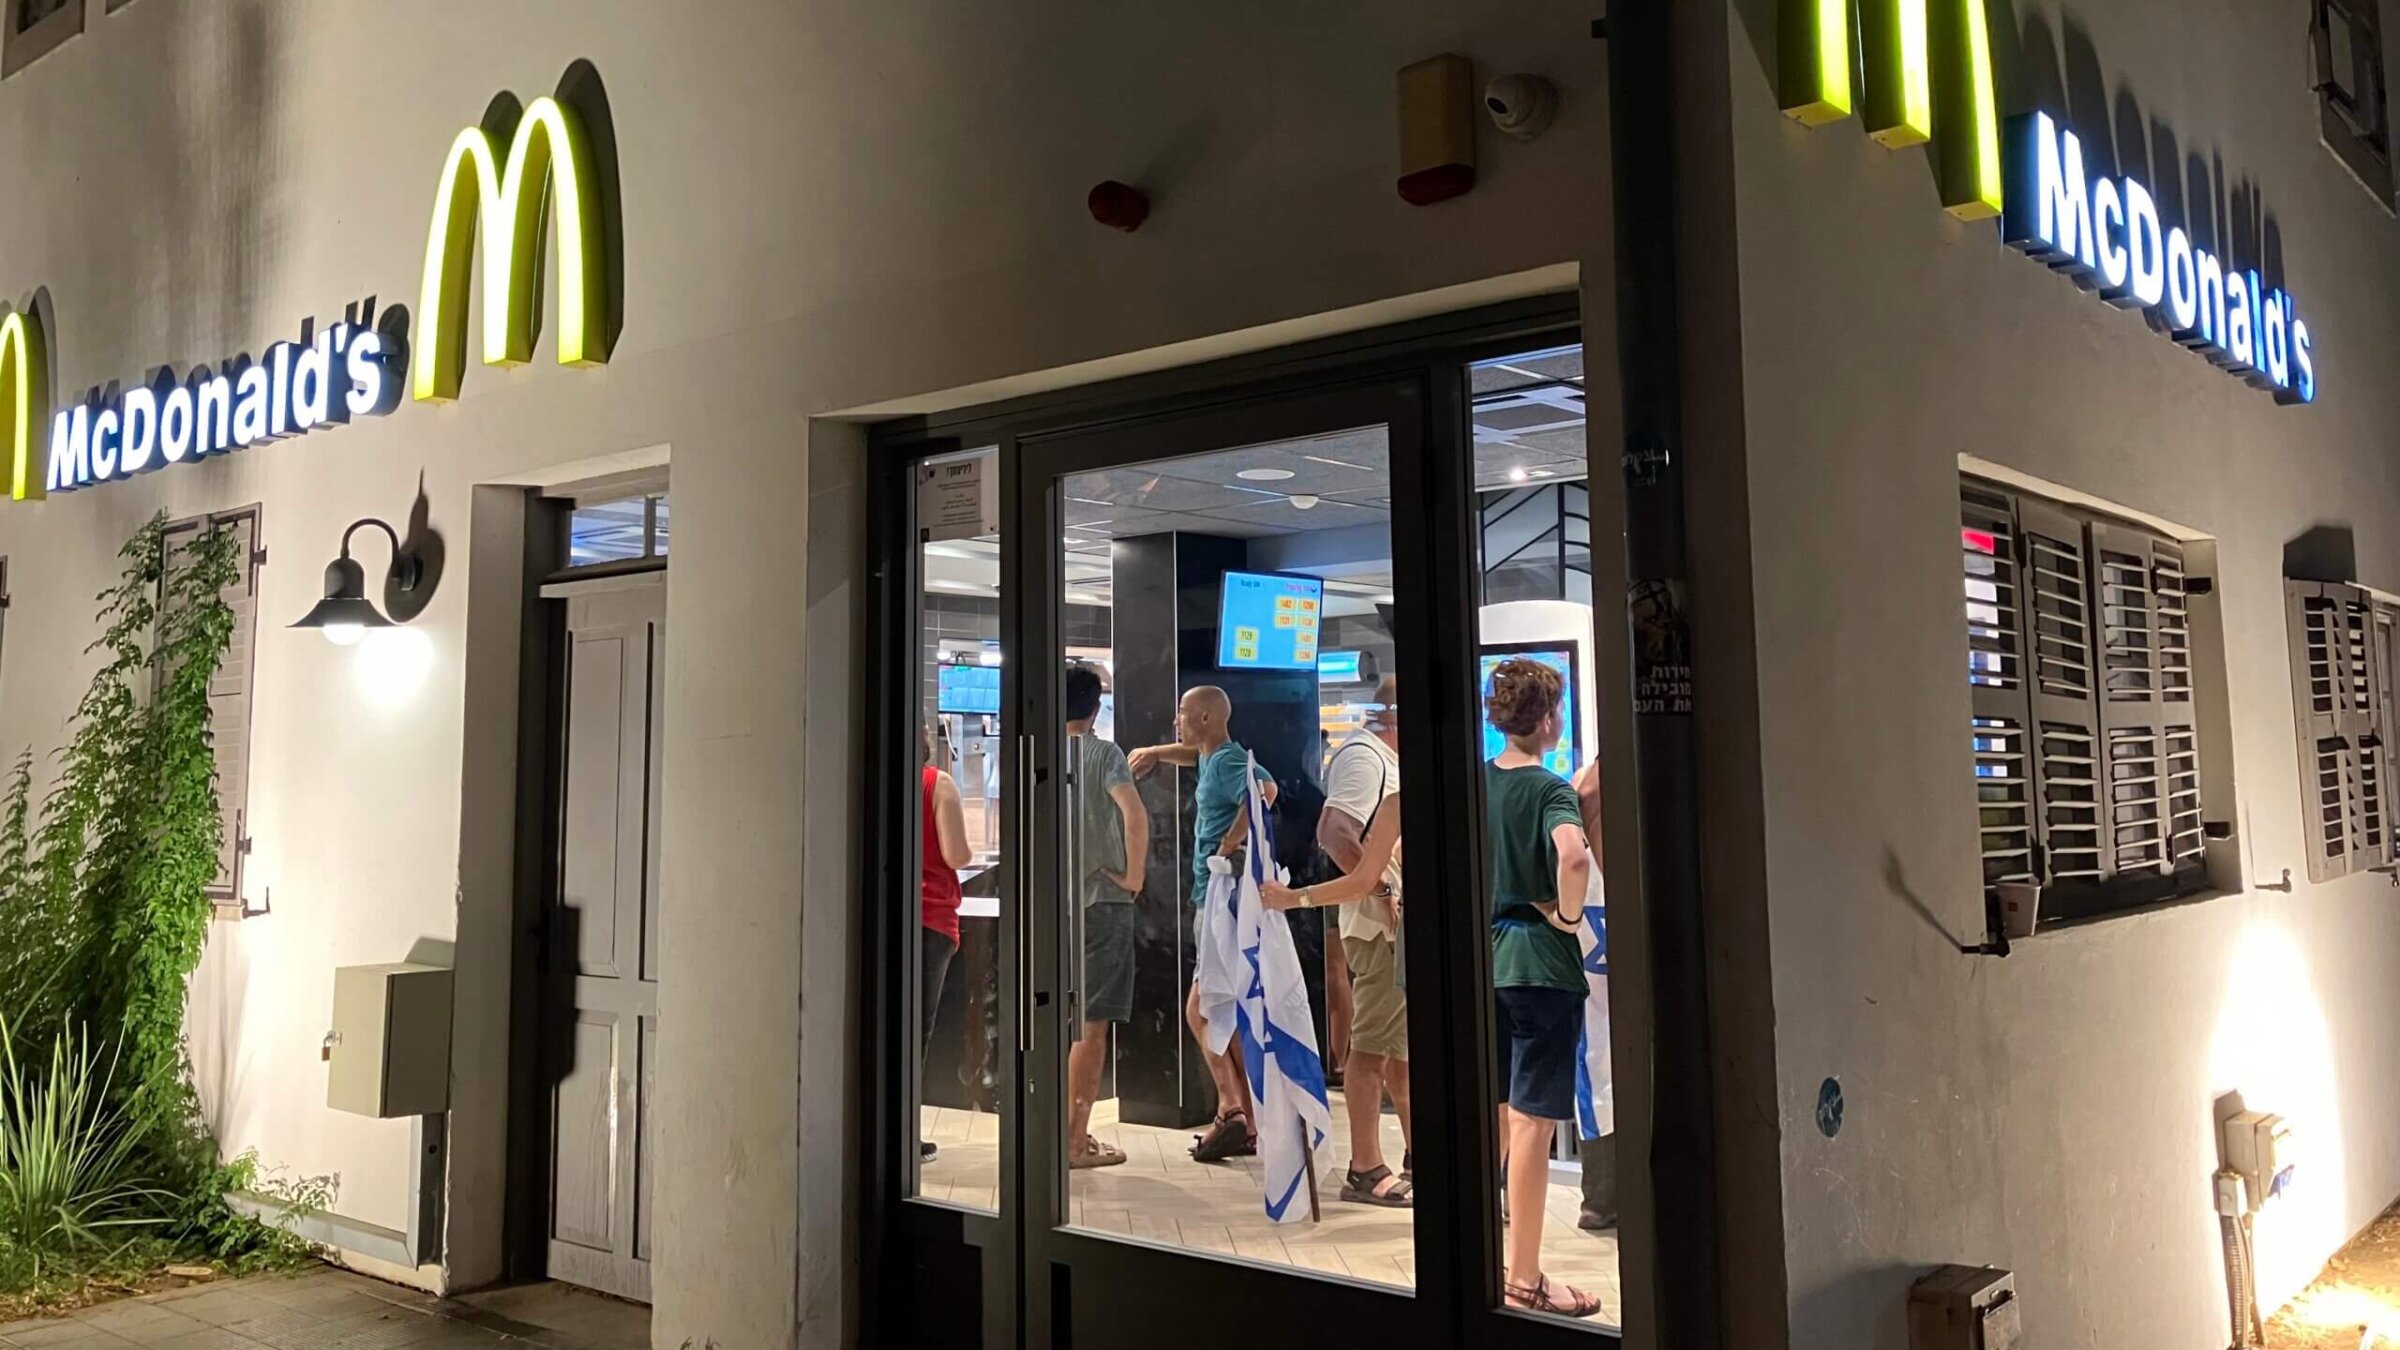 A McDonalds on the protest route in Tel Aviv filled with protestors after the march dispersed.